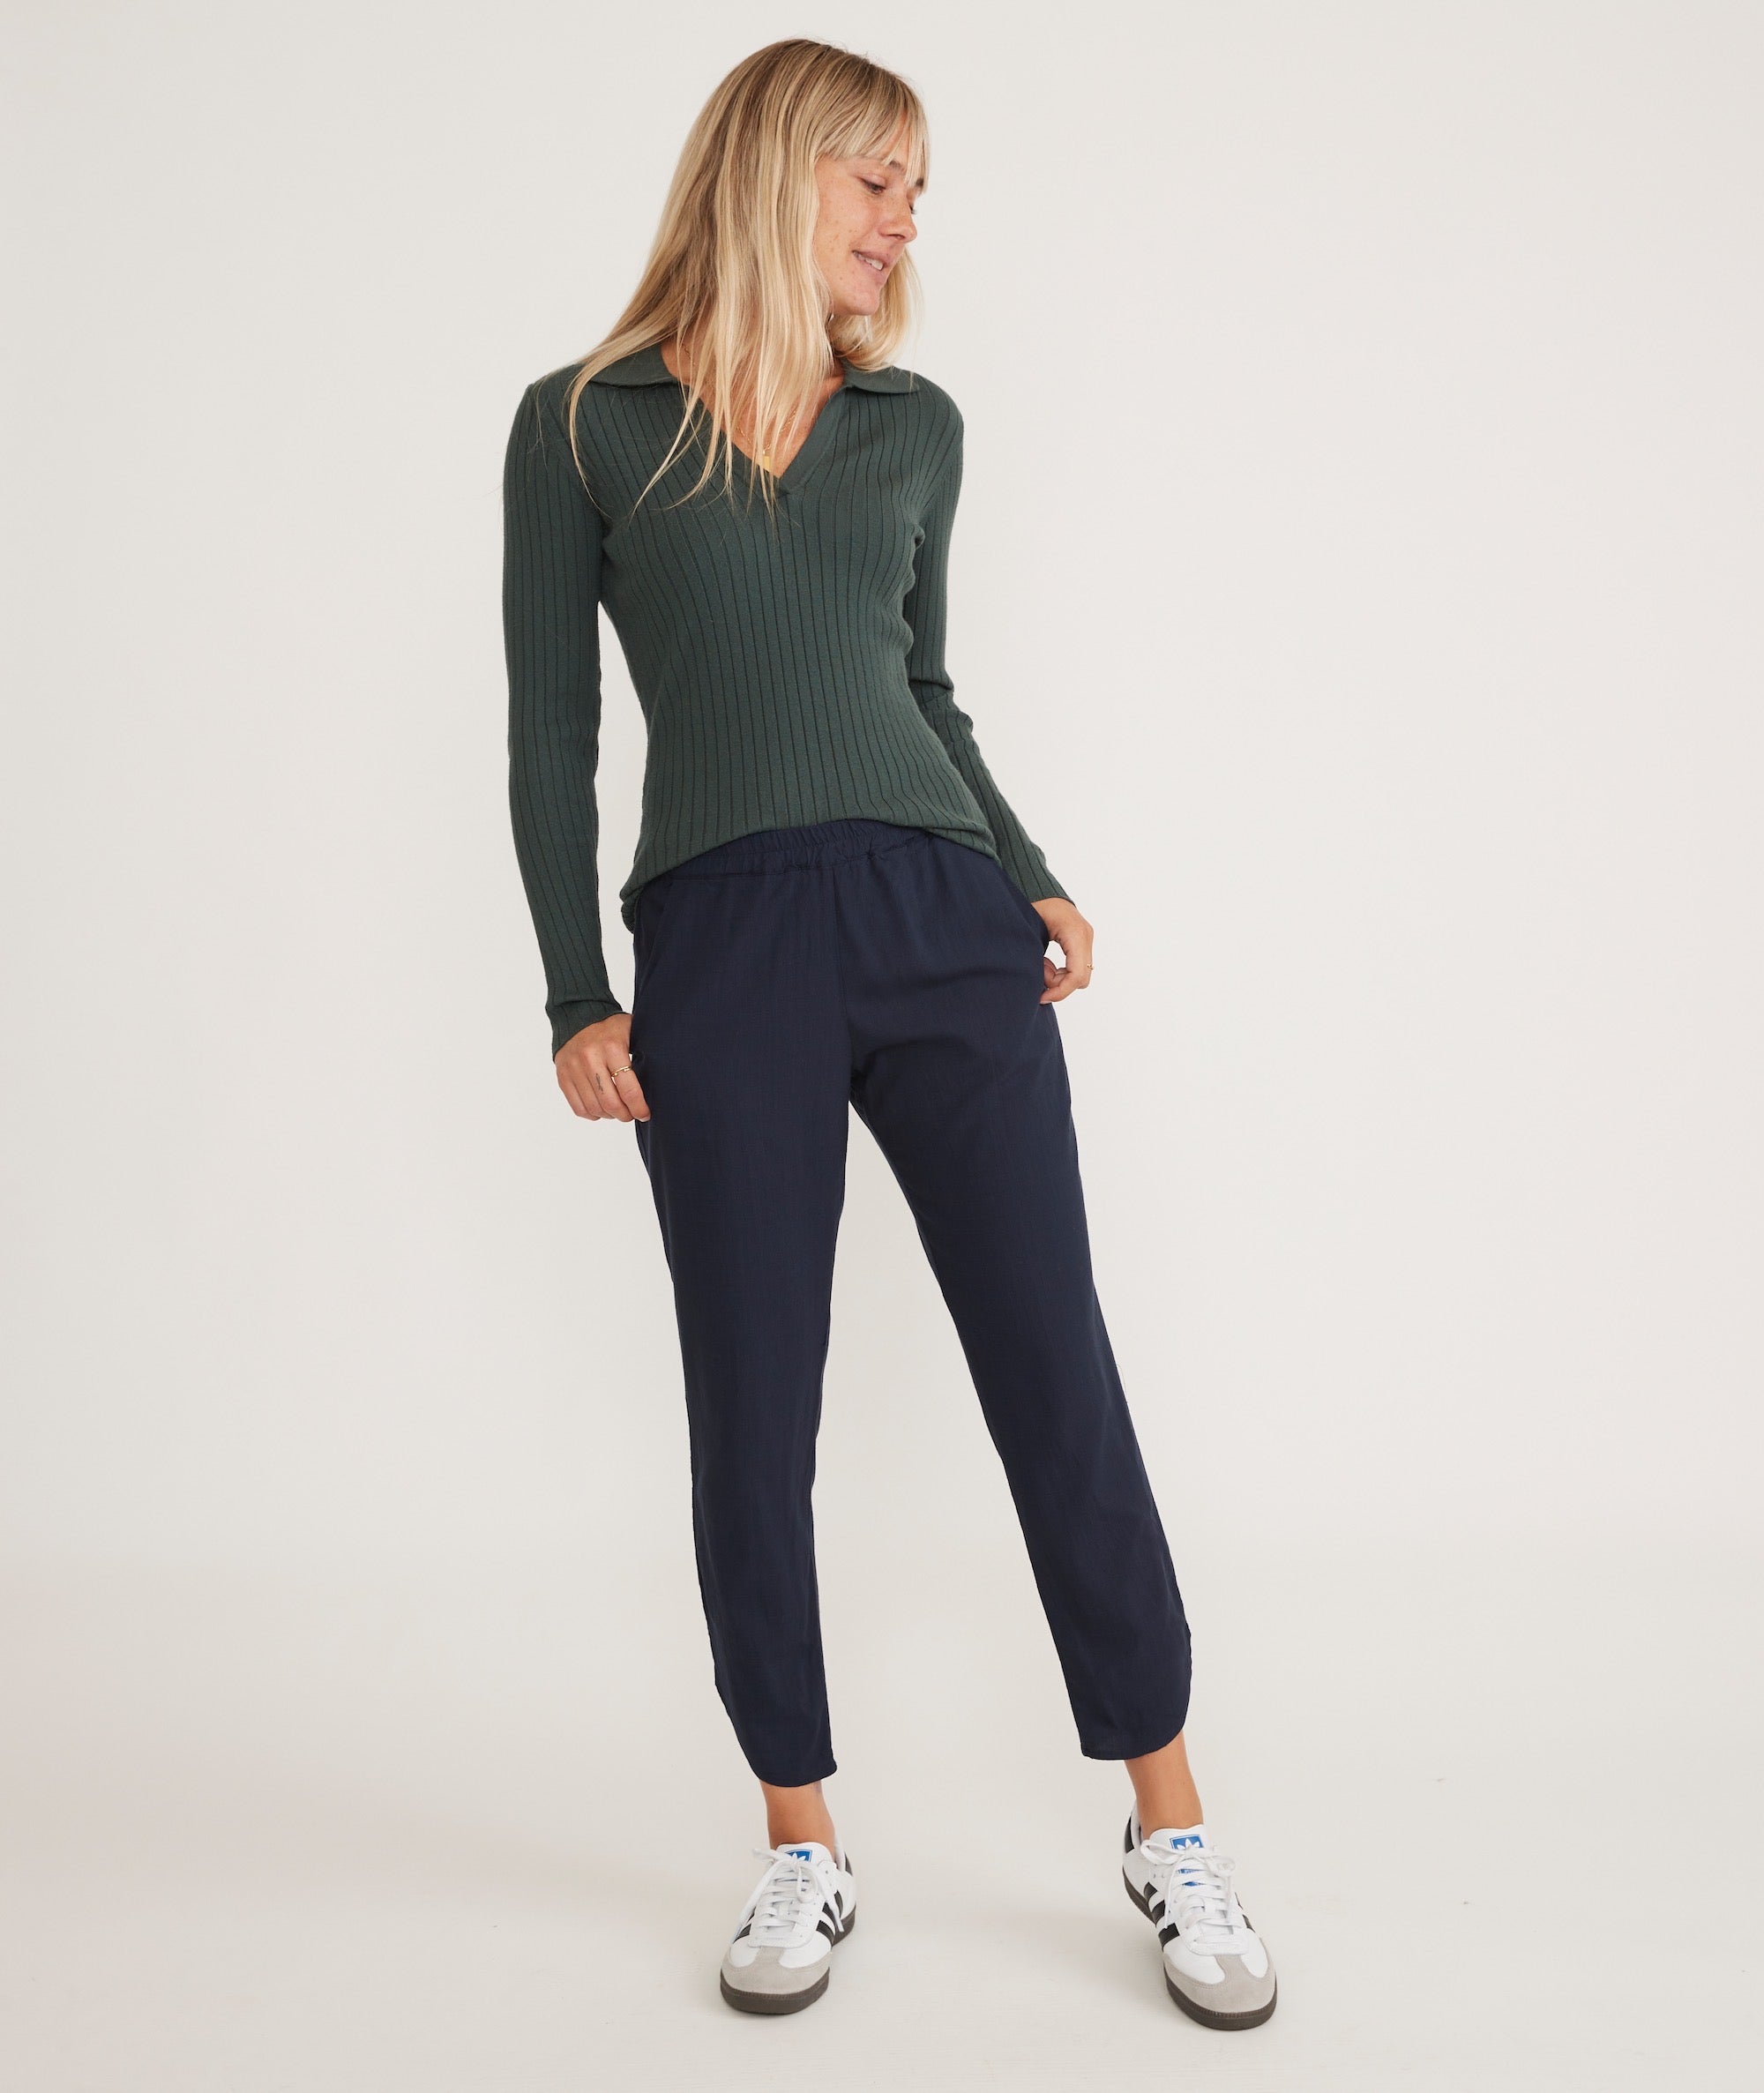 Re-Spun Tall and Navy in – Allison Marine Petite Pant Layer